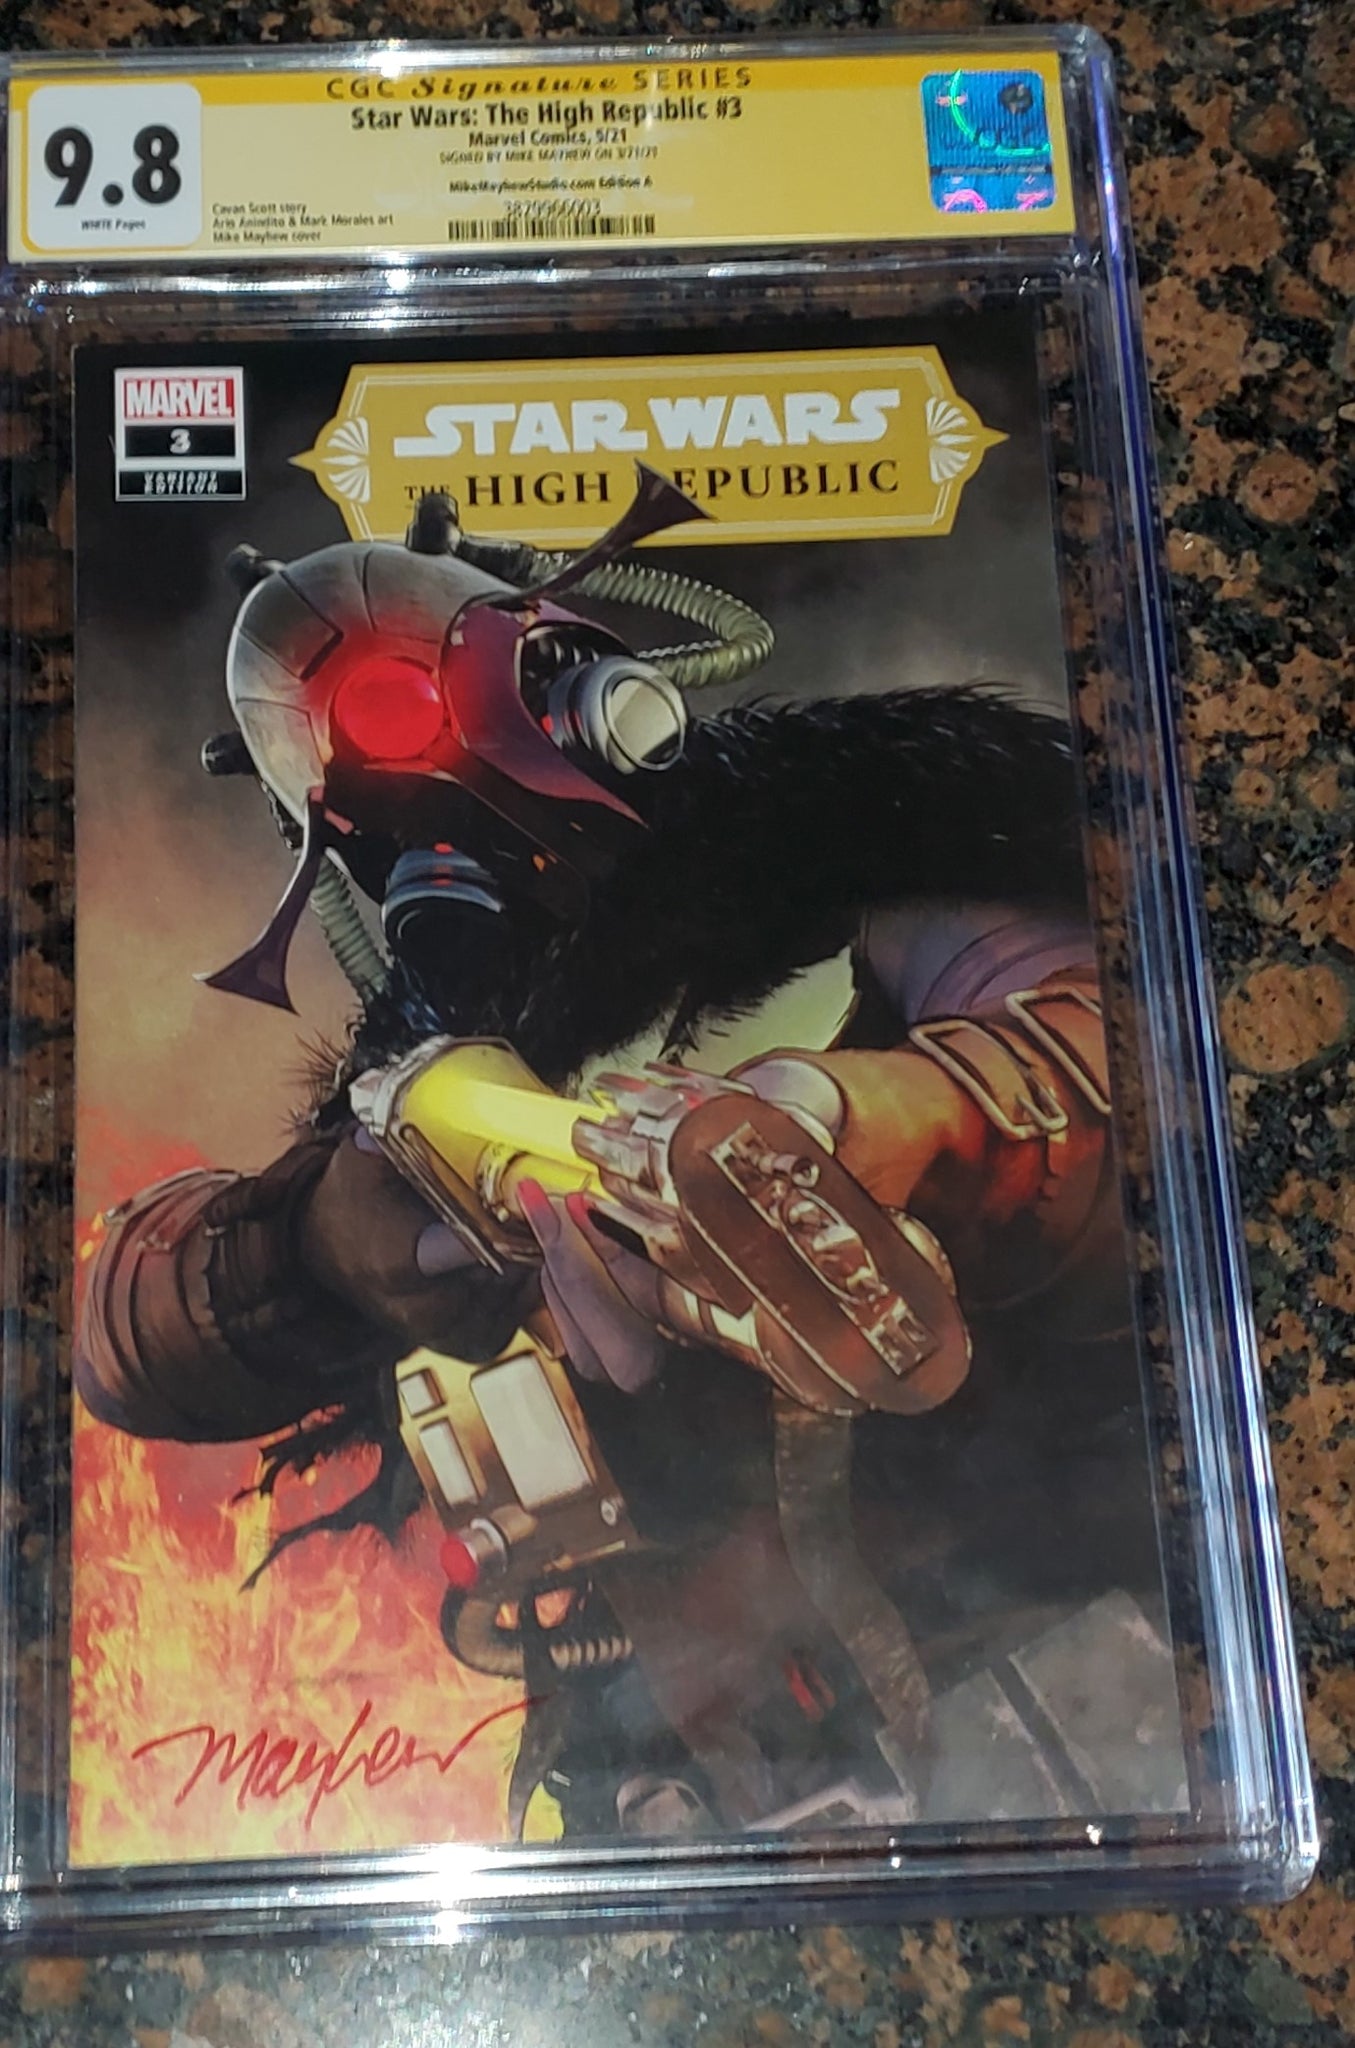 STAR WARS HIGH REPUBLIC #3 CGC SS 9.8 MIKE MAYHEW SIGNED MARCHION RO TRADE DRESS VARIANT-A